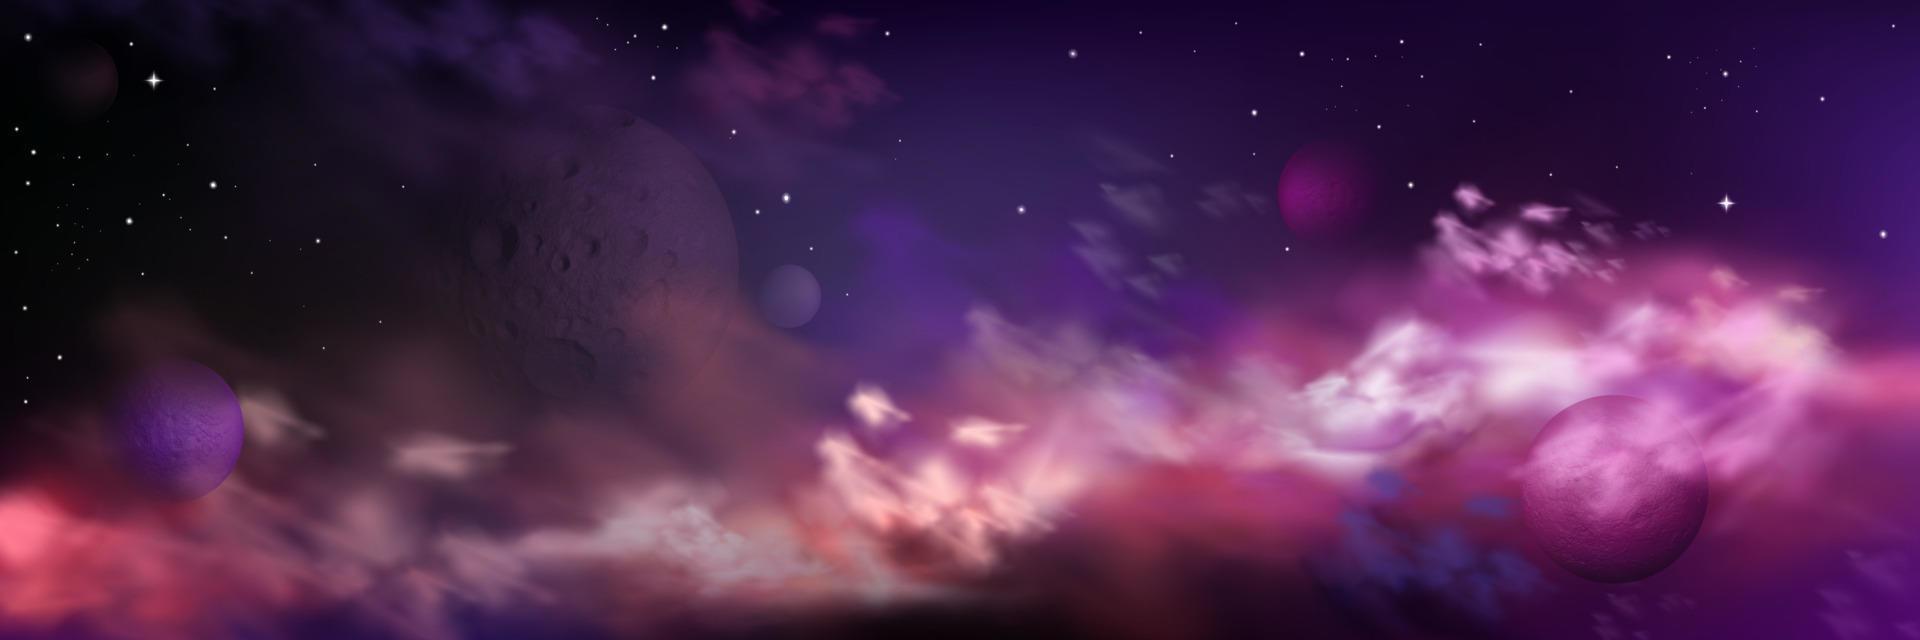 Realistic space background with planets, stars vector